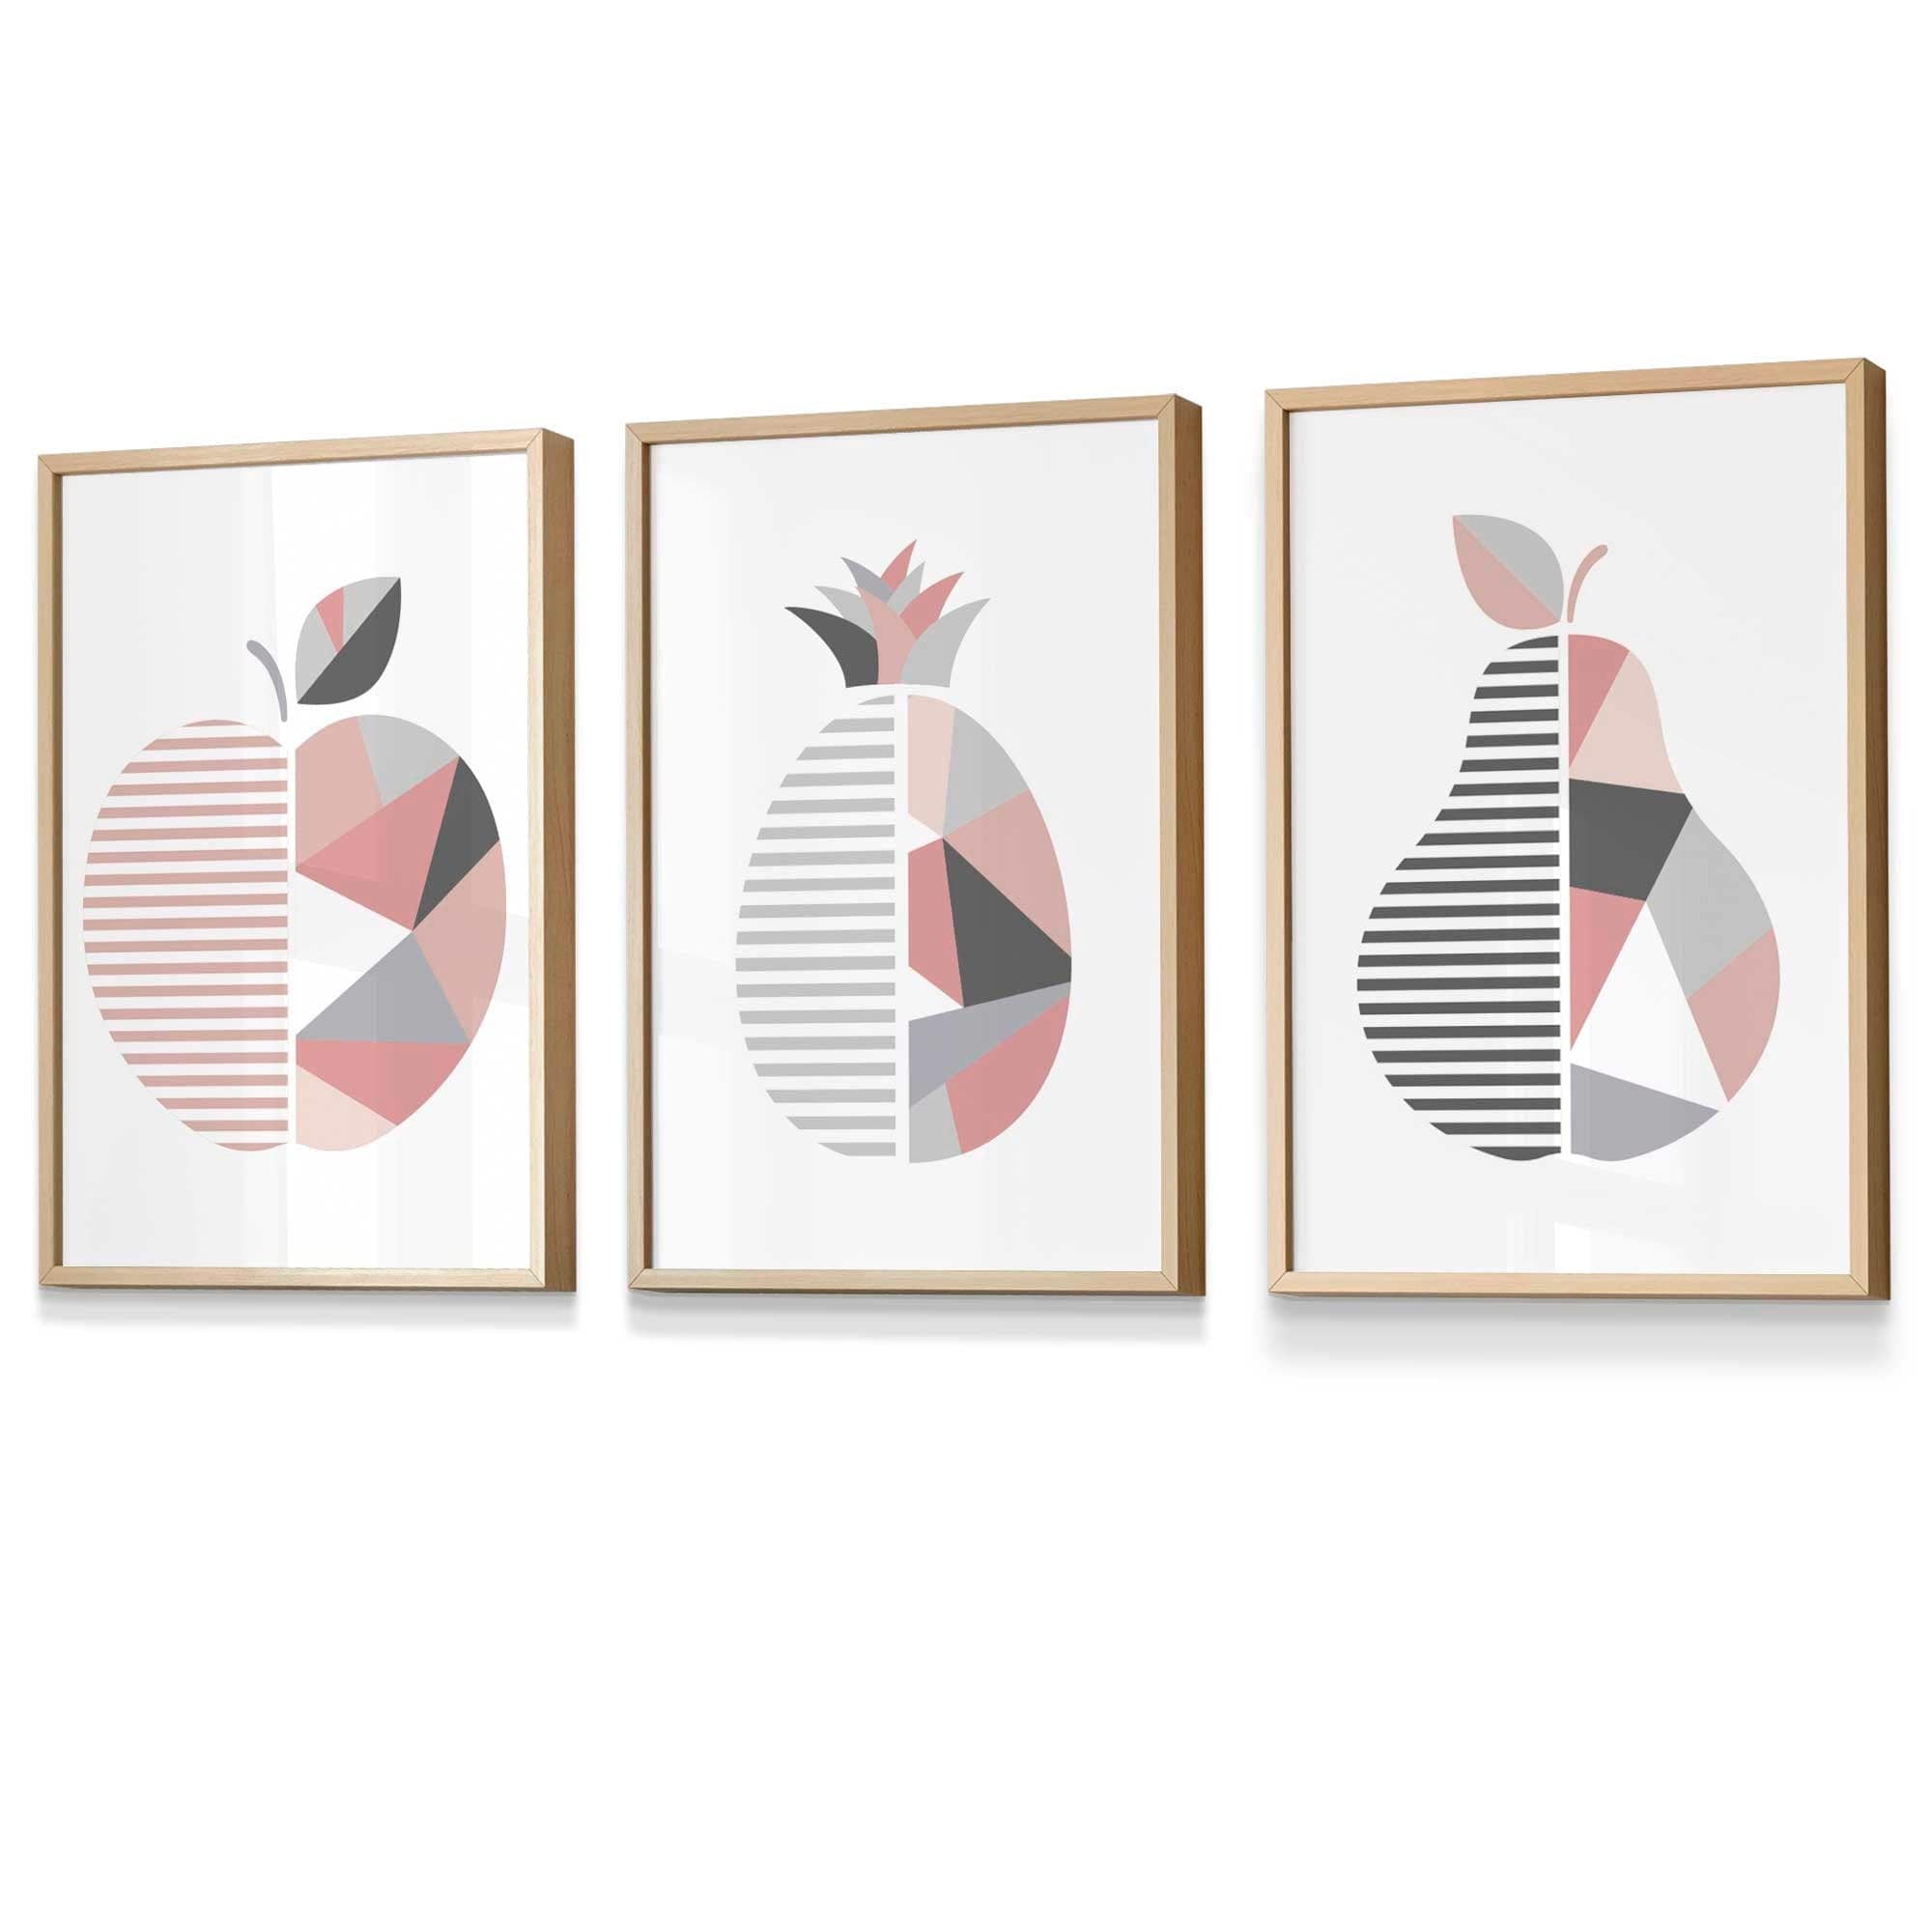 Set of 3 FRAMED Blush Pink and Grey Geometric Line Wall Art Fruit Featuring Apple Pear and Pineapple | Artze Wall Art UK